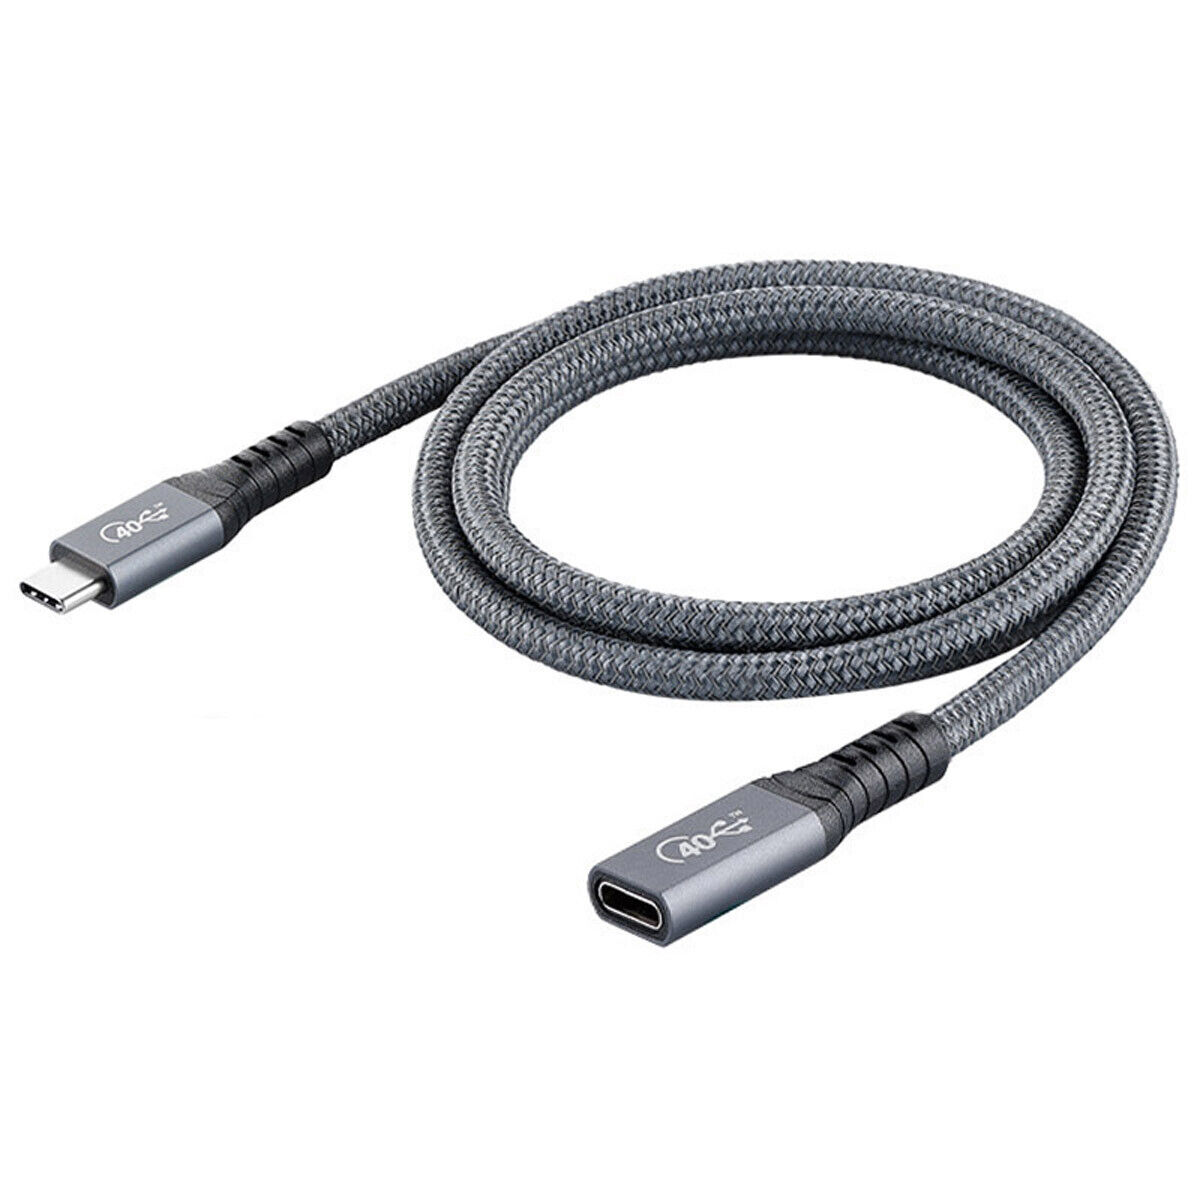 NFHK USB4.0 Type-C 8K@60Hz Compatible with Thunderbolt3/4 USB4 Extension Cable